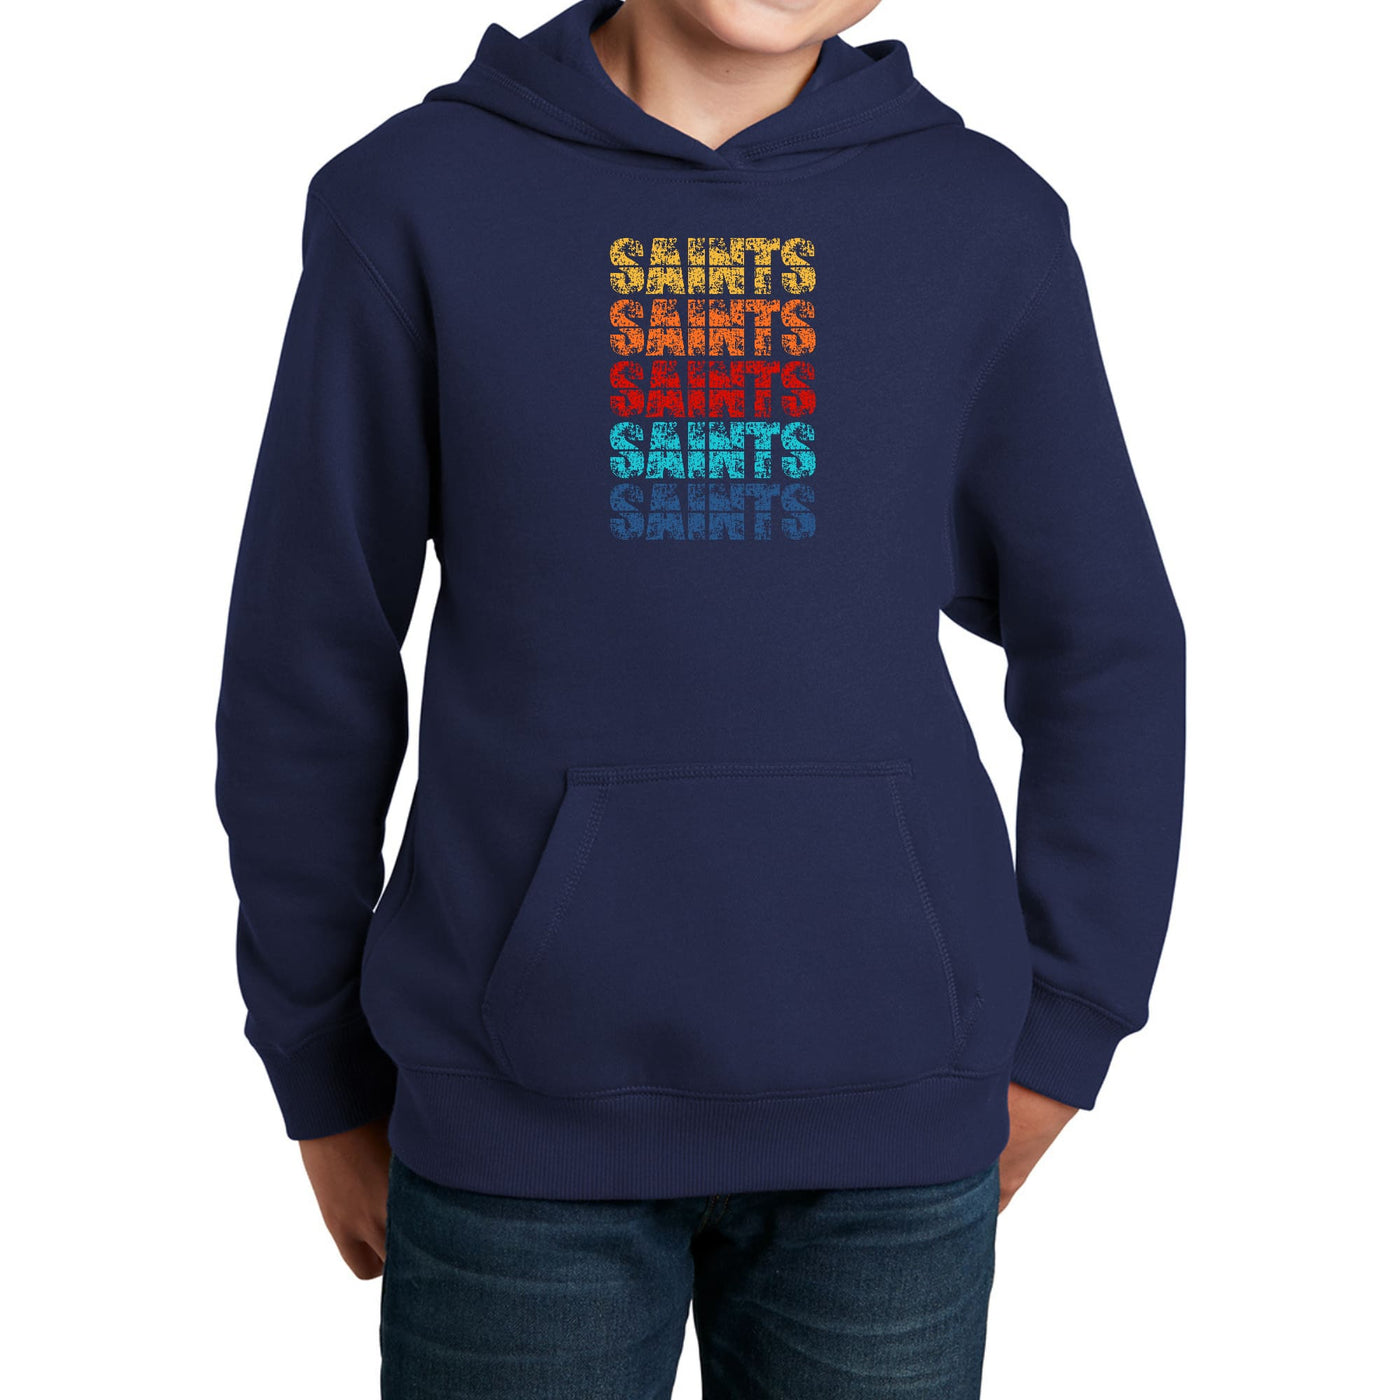 Youth Long Sleeve Hoodie Saints Colorful Art Illustration - Youth | Hoodies